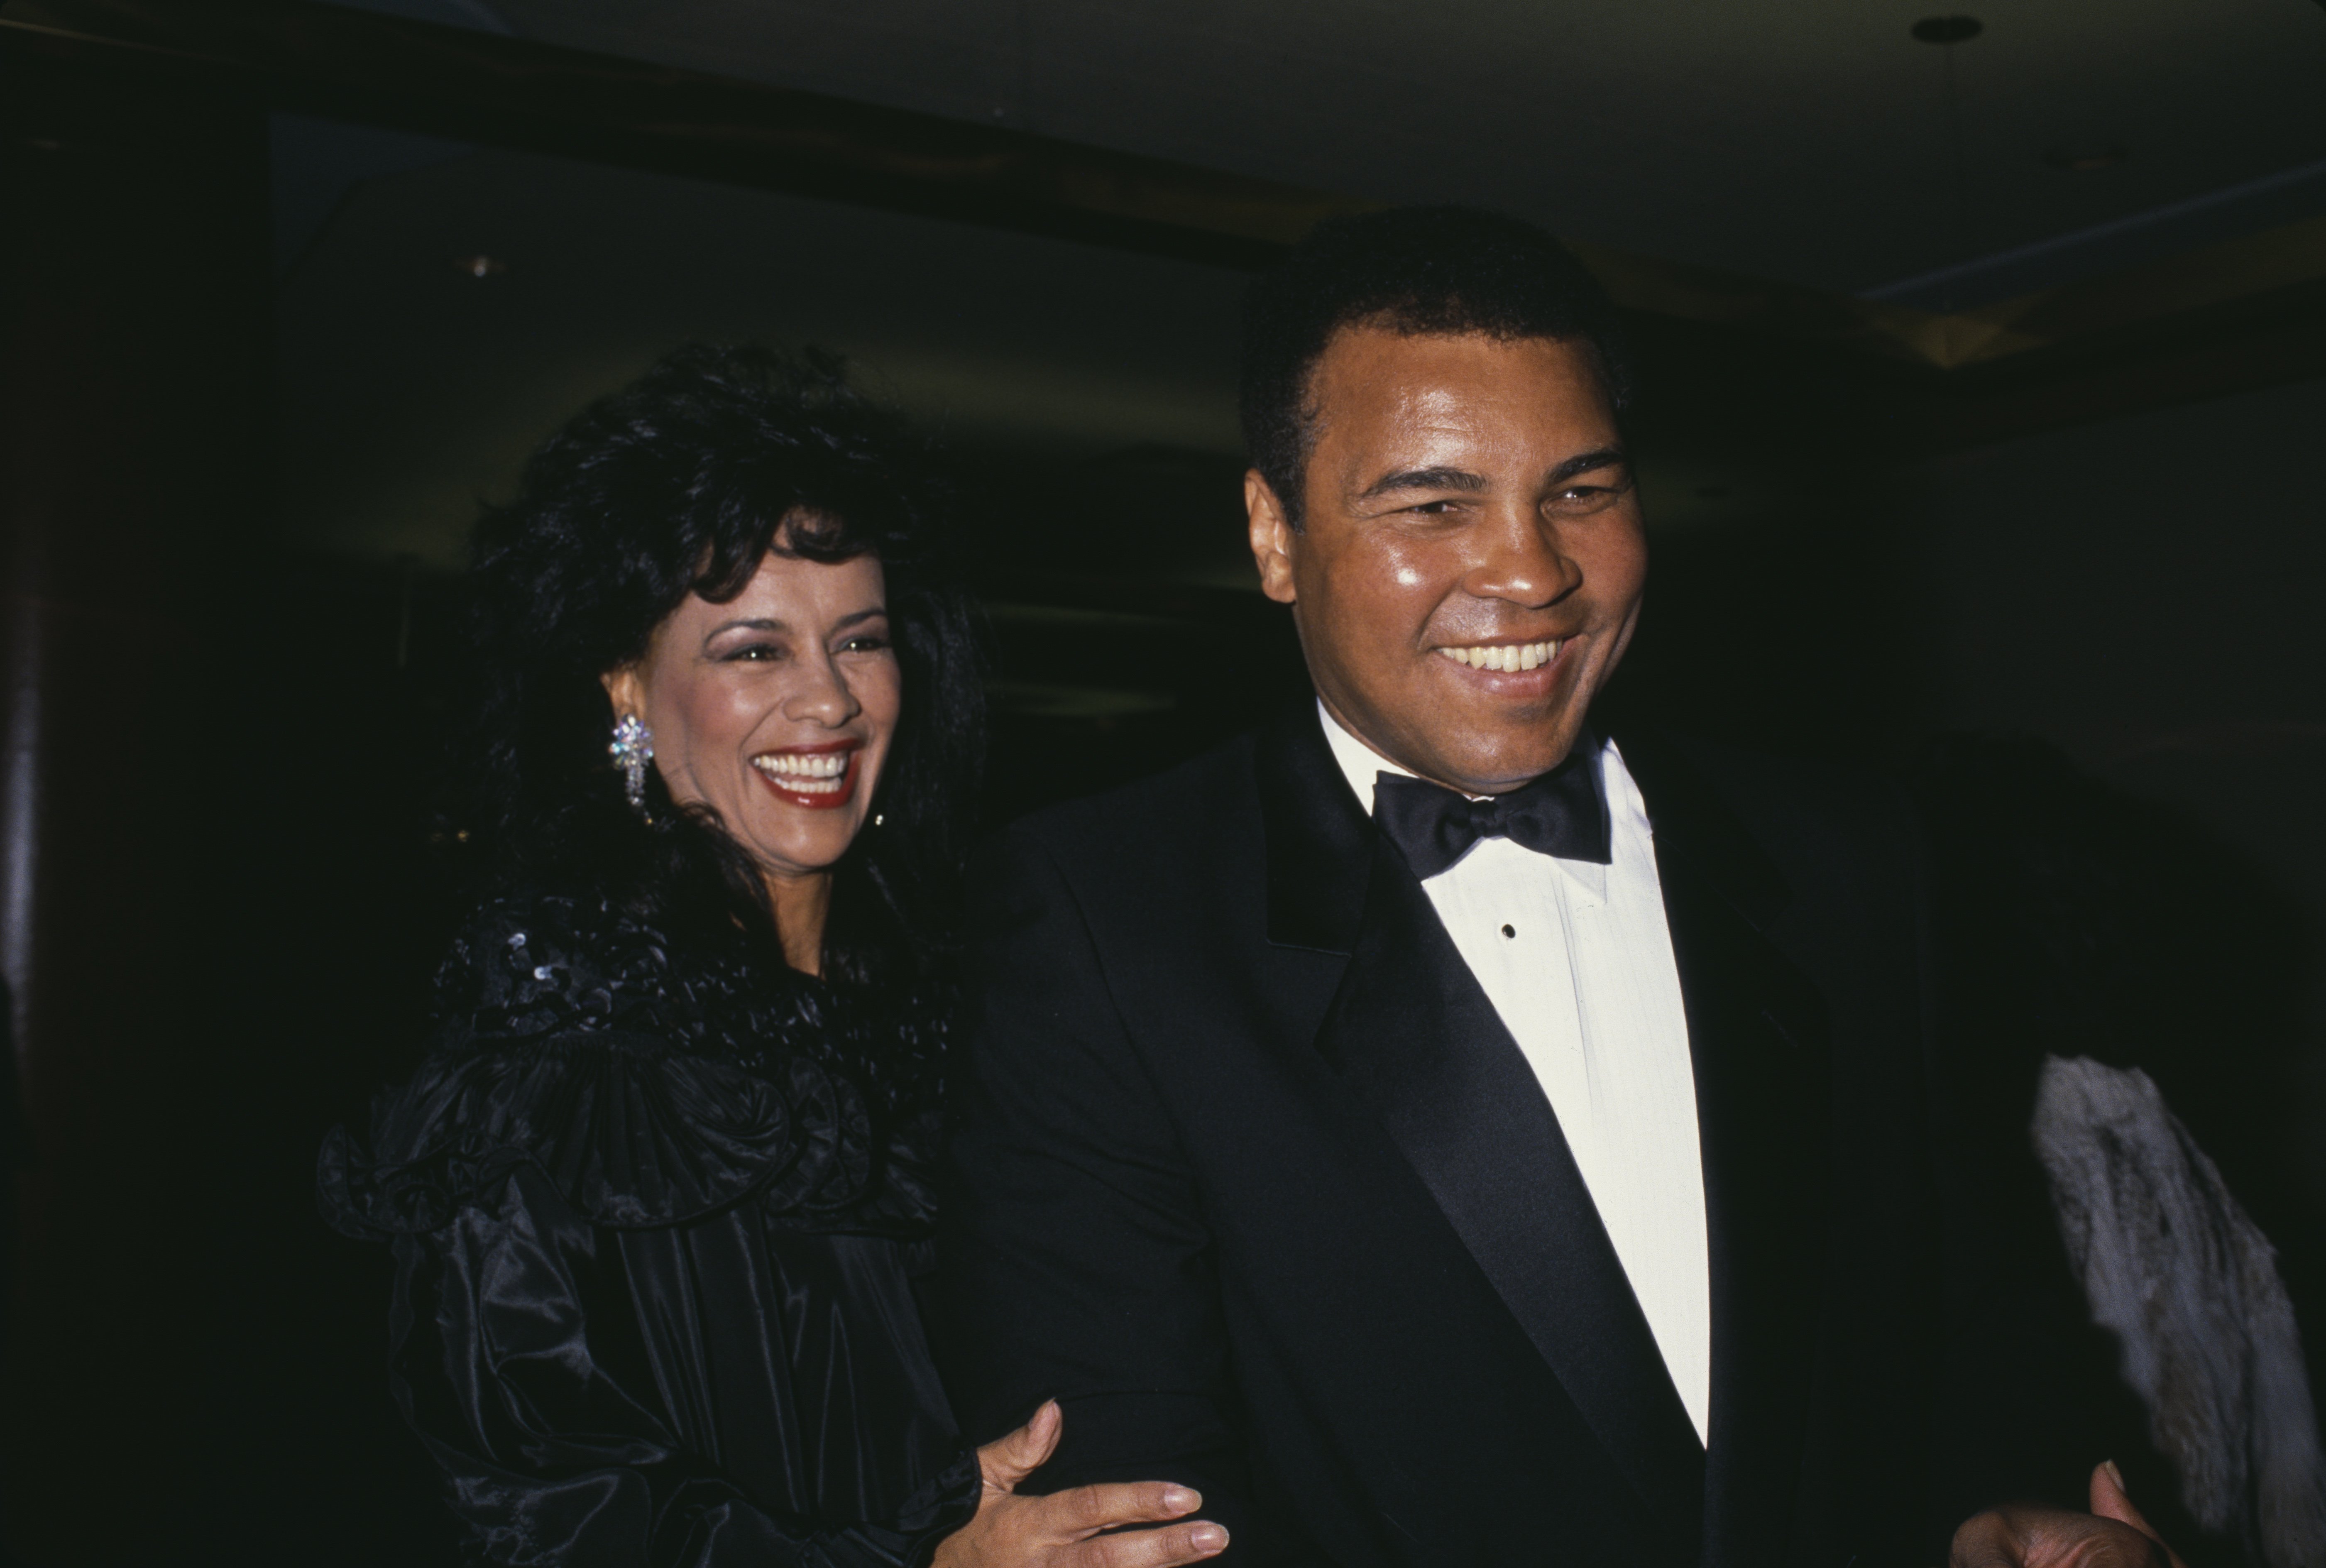 Veronica Porché and Muhammad Ali attend an event in 1985. | Source: Getty Images